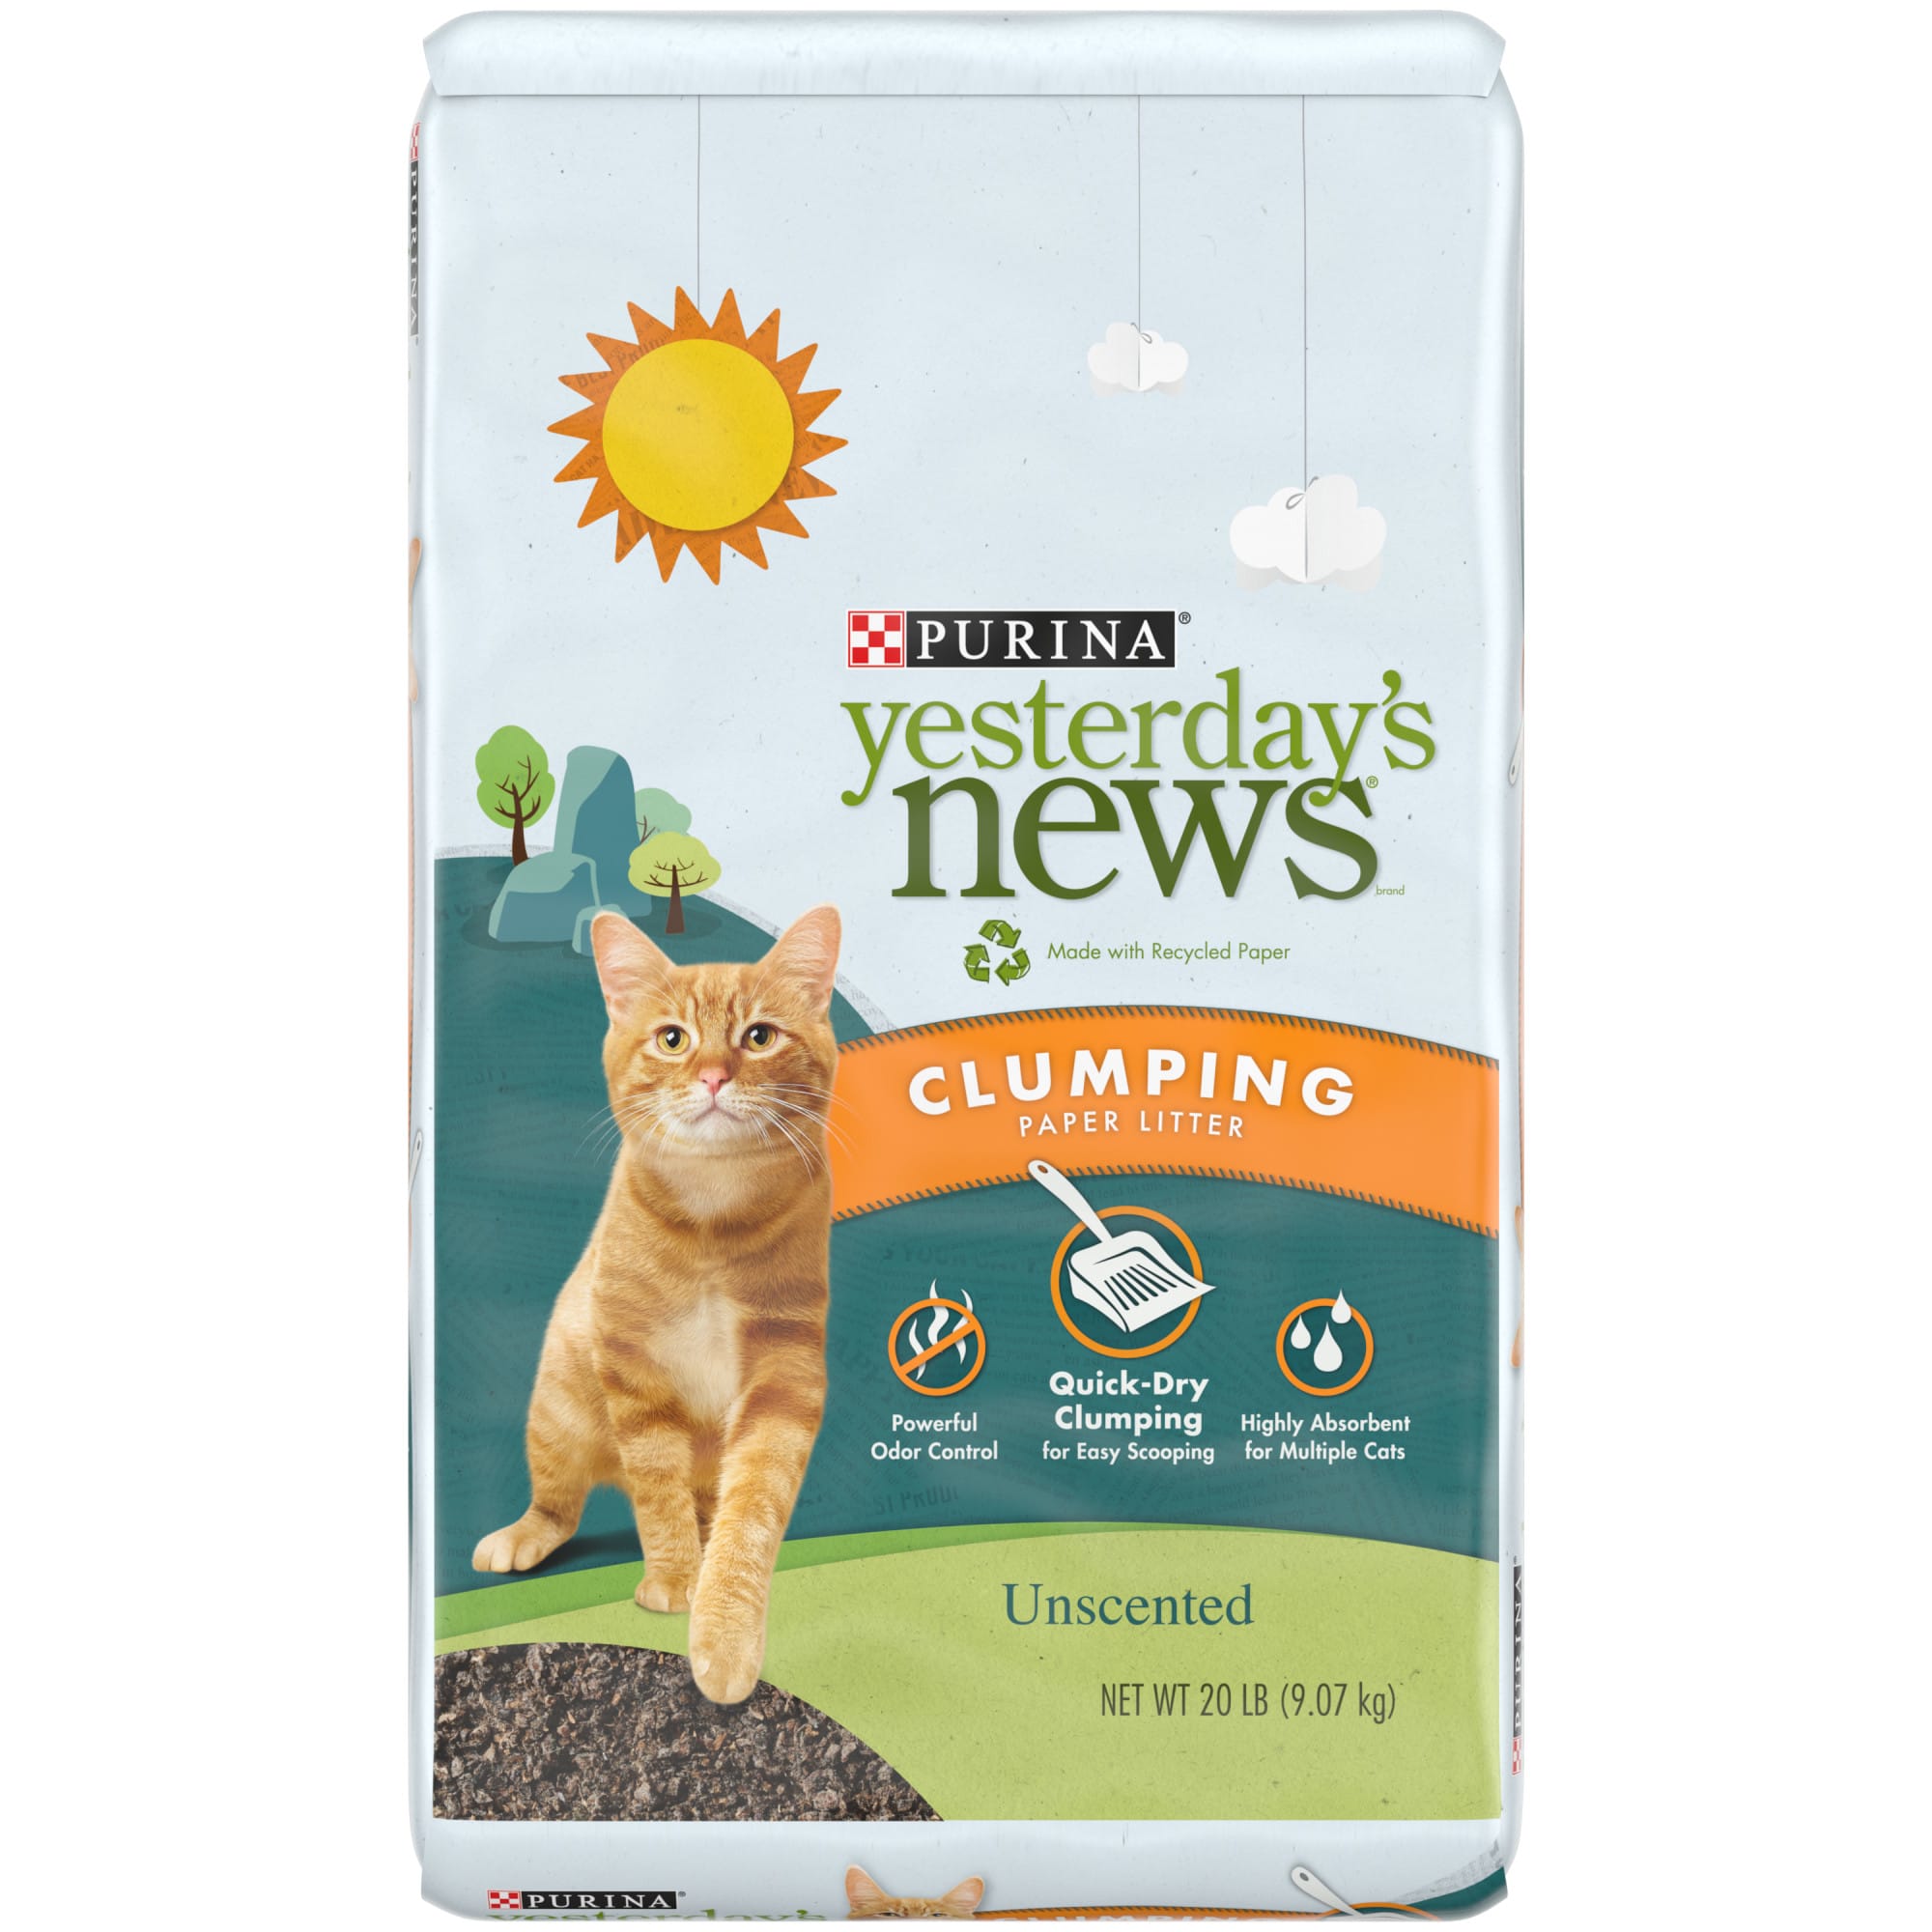 Yesterday's News Original Cat Litter Unscented 5 lb * Click on the